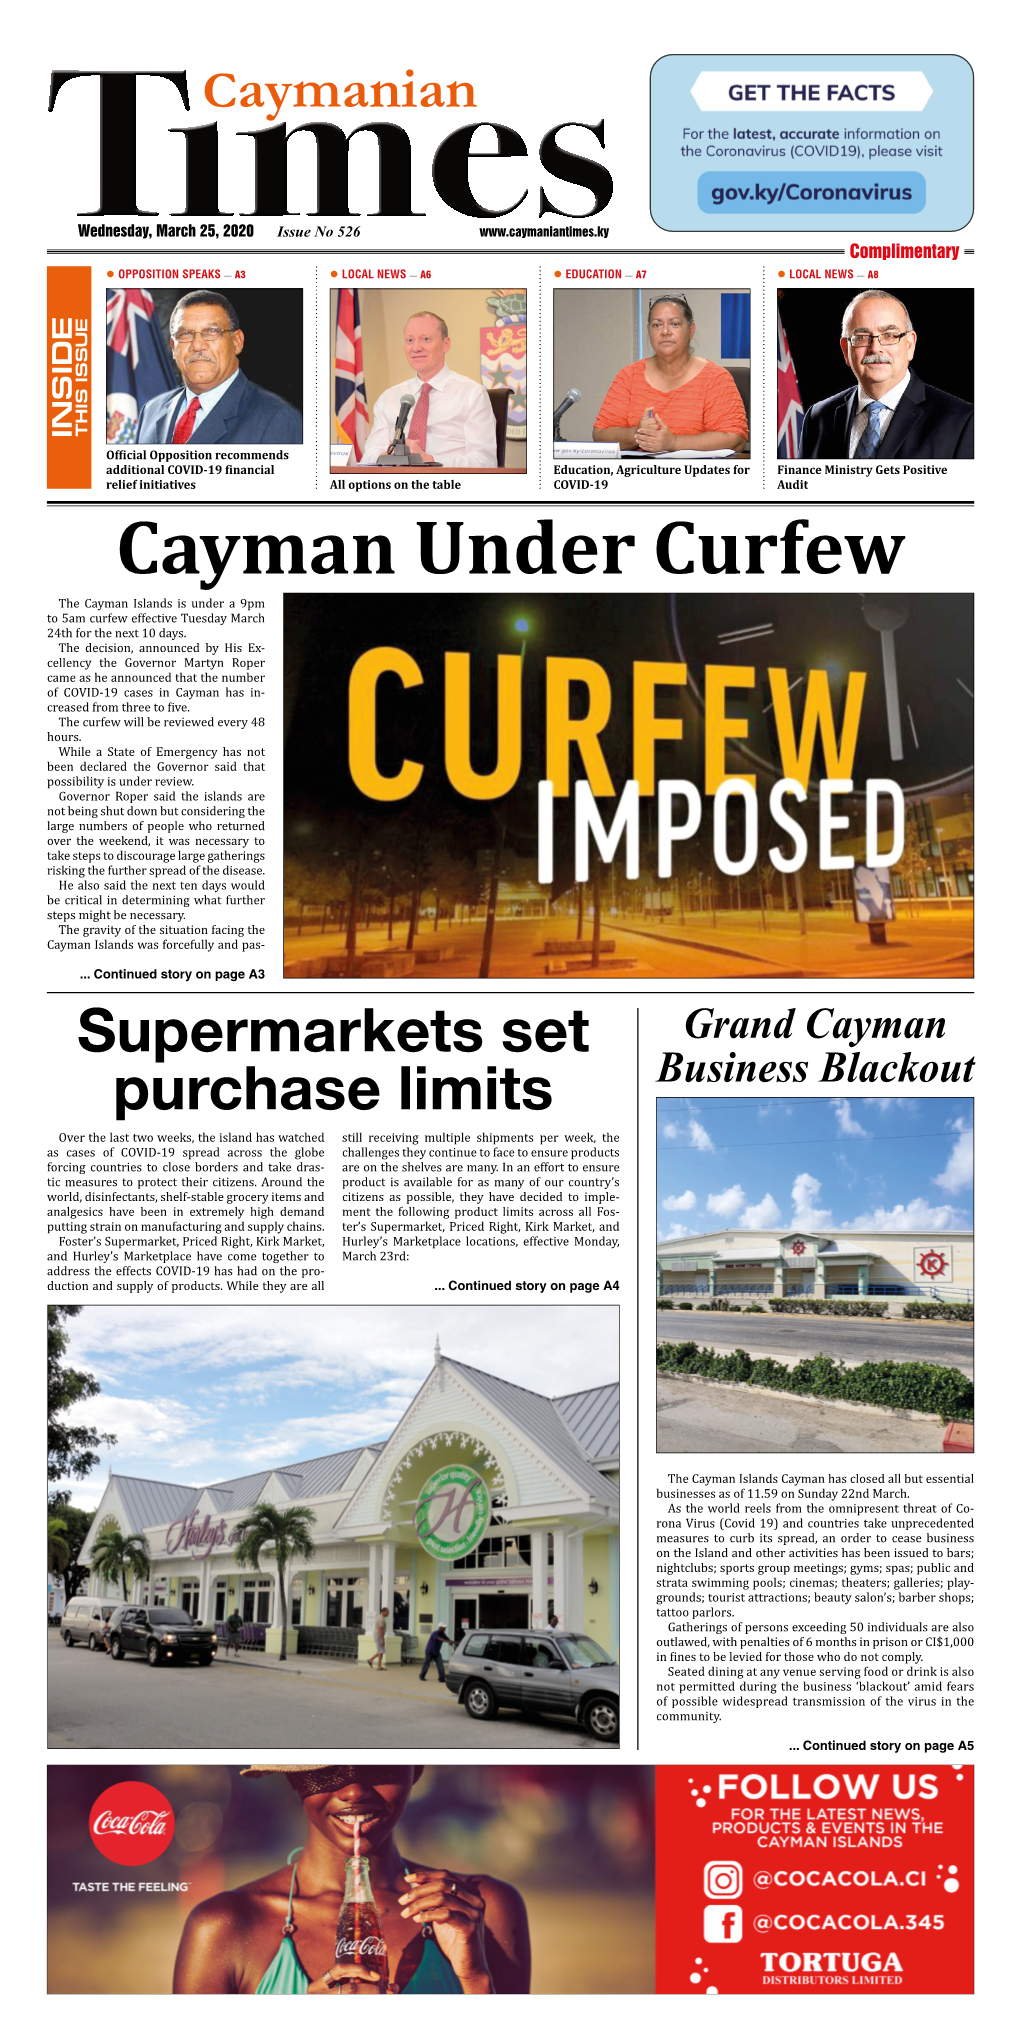 Cayman Under Curfew the Cayman Islands Is Under a 9Pm to 5Am Curfew Effective Tuesday March 24Th for the Next 10 Days